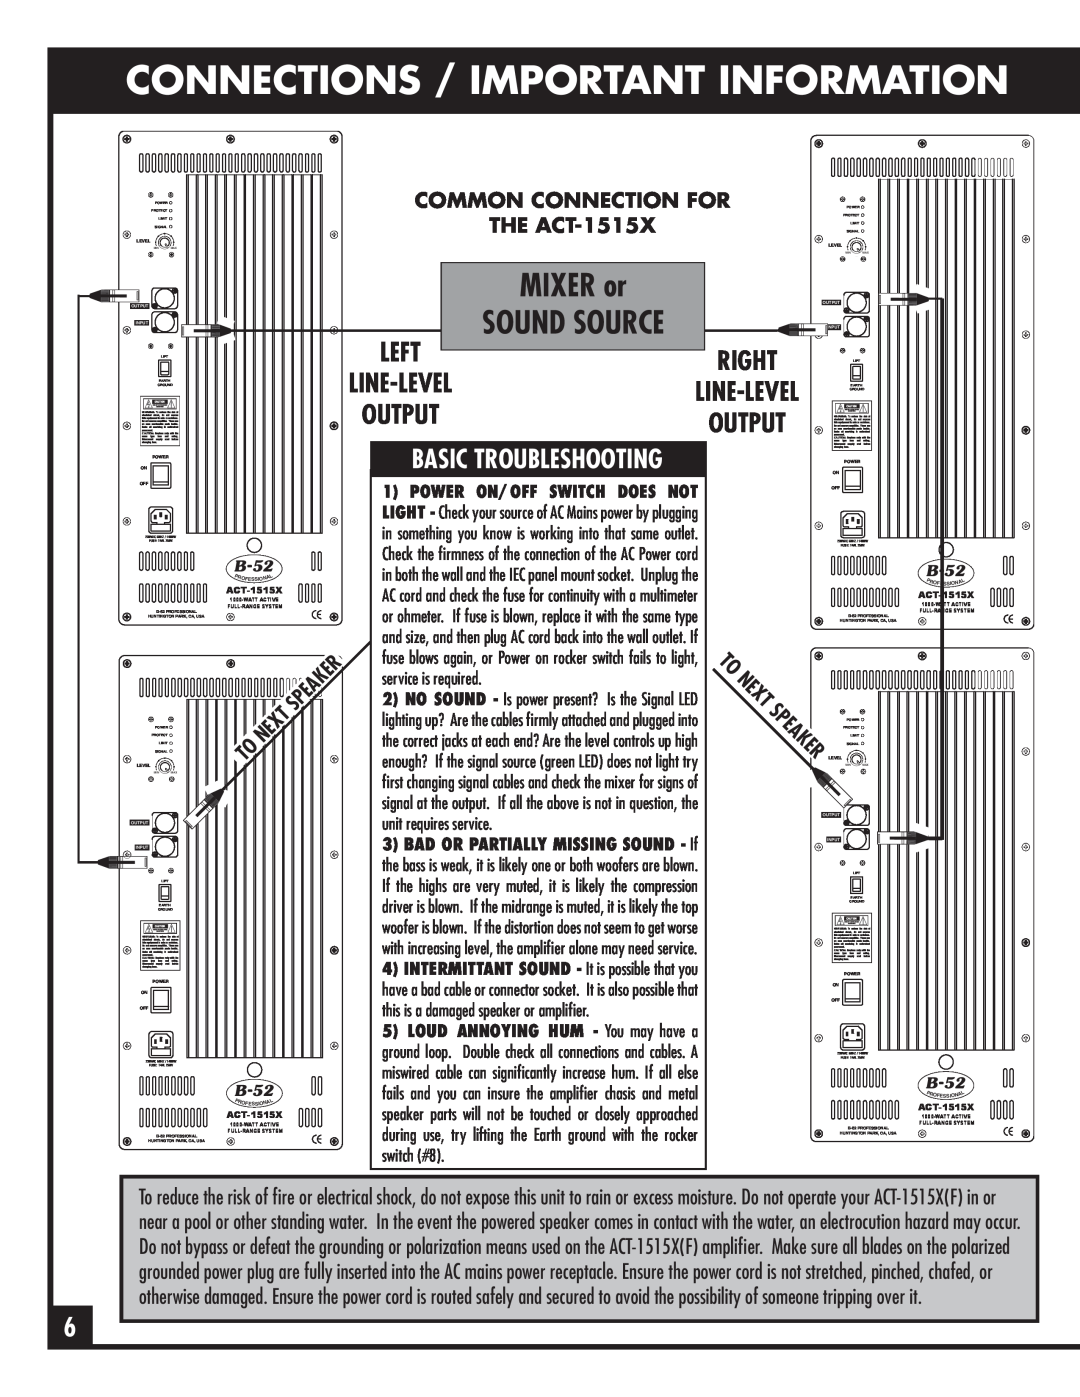 ETI Sound Systems, INC ACT-1515X(F) manual Connections / Important Information, COMMON CONNECTION FOR THE ACT-1515X 